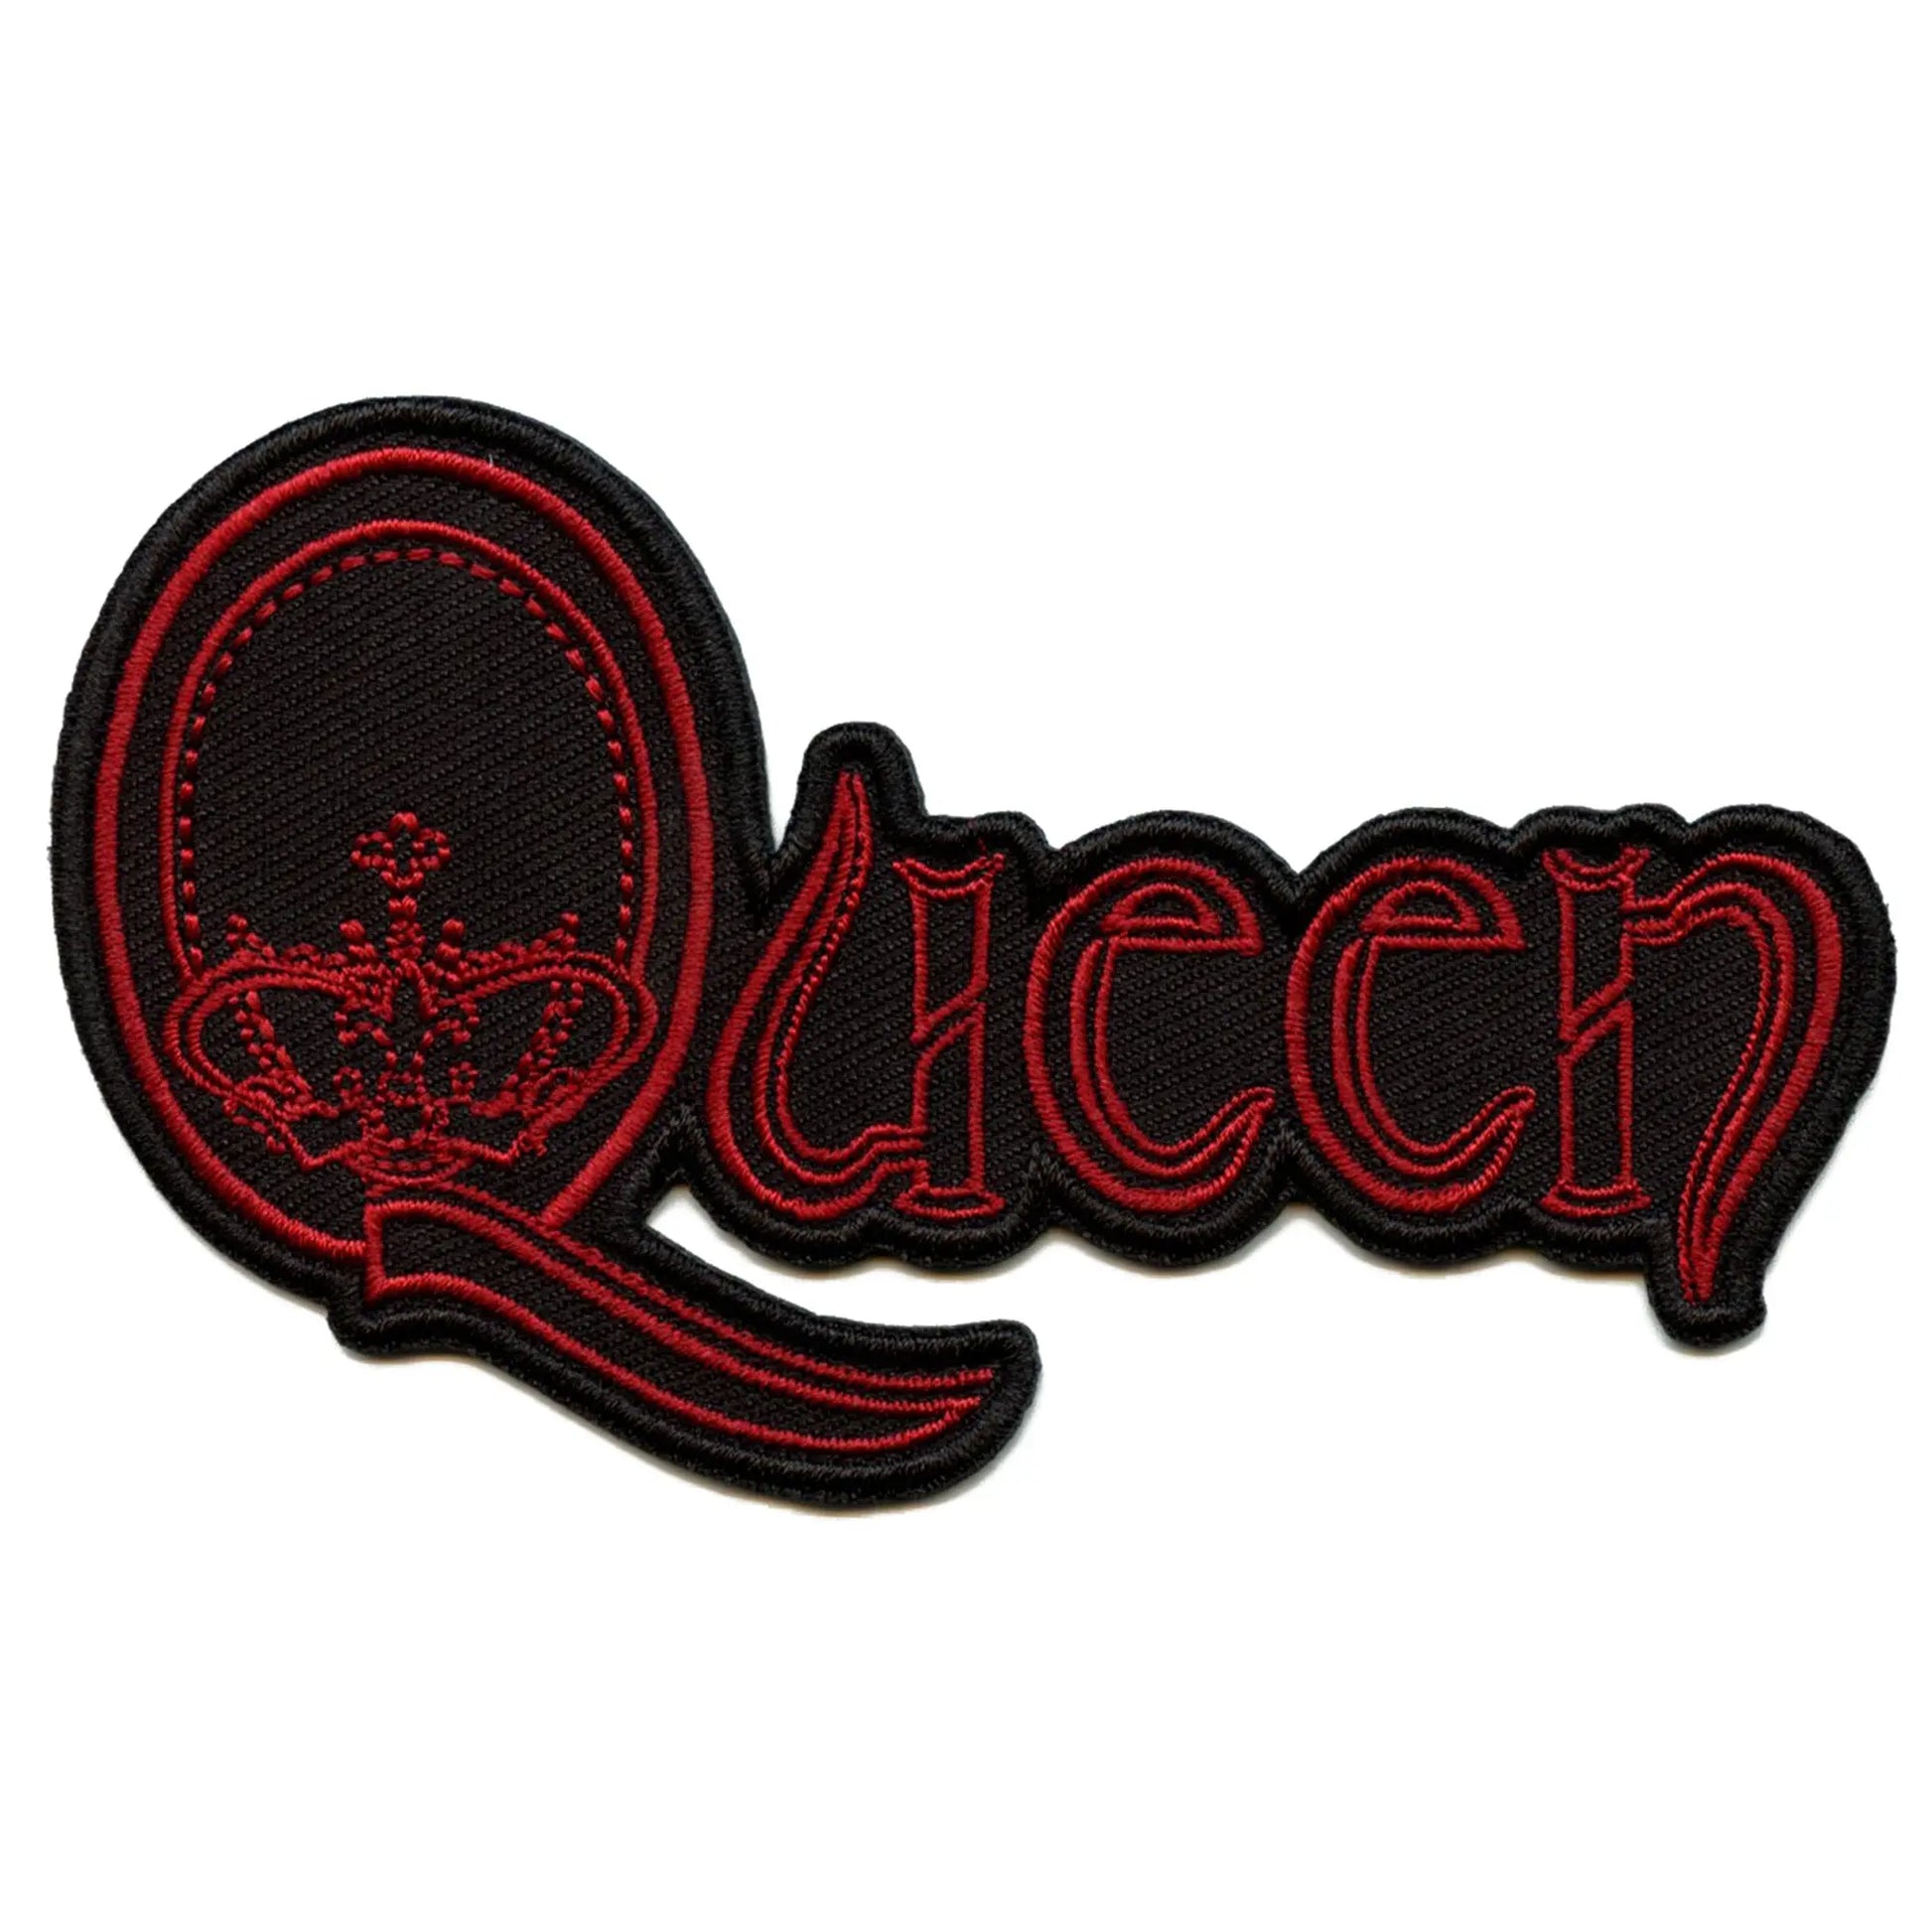 Queen Crown Logo Patch Classic British Rock Band Embroidered Iron On